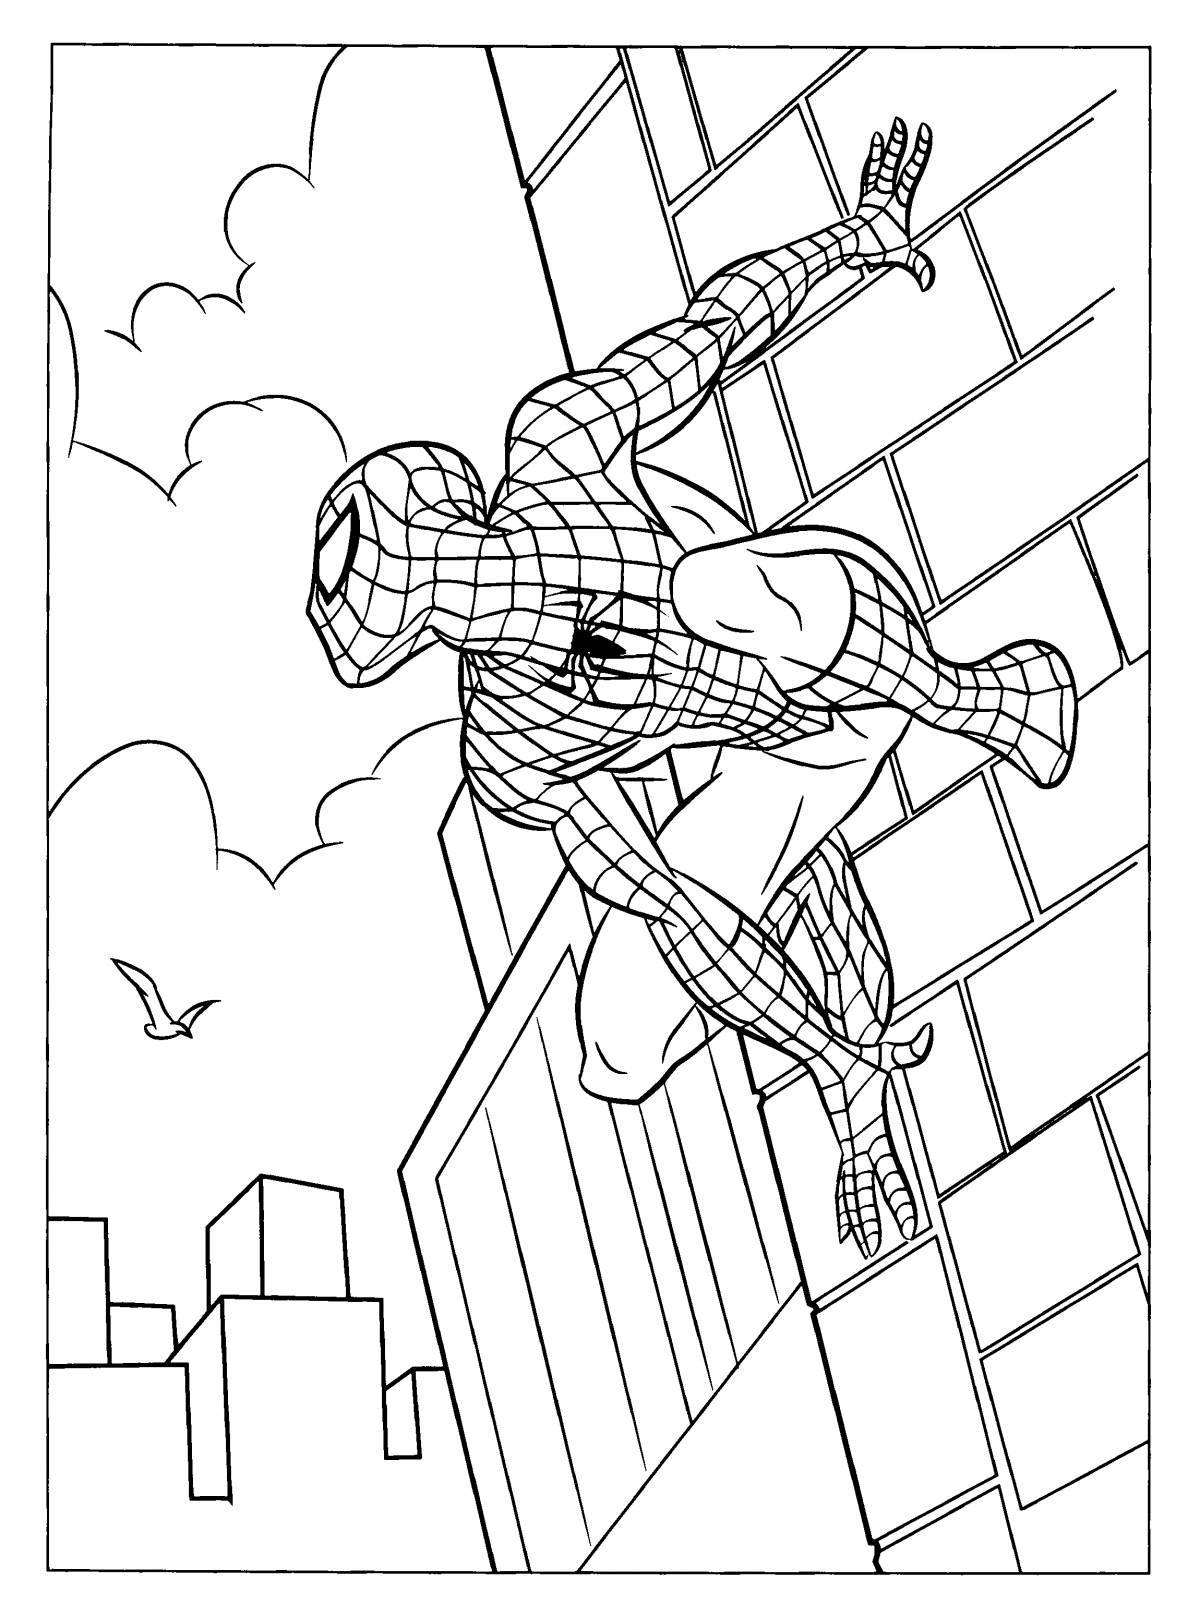 Adorable Spiderman Coloring Page for Kids